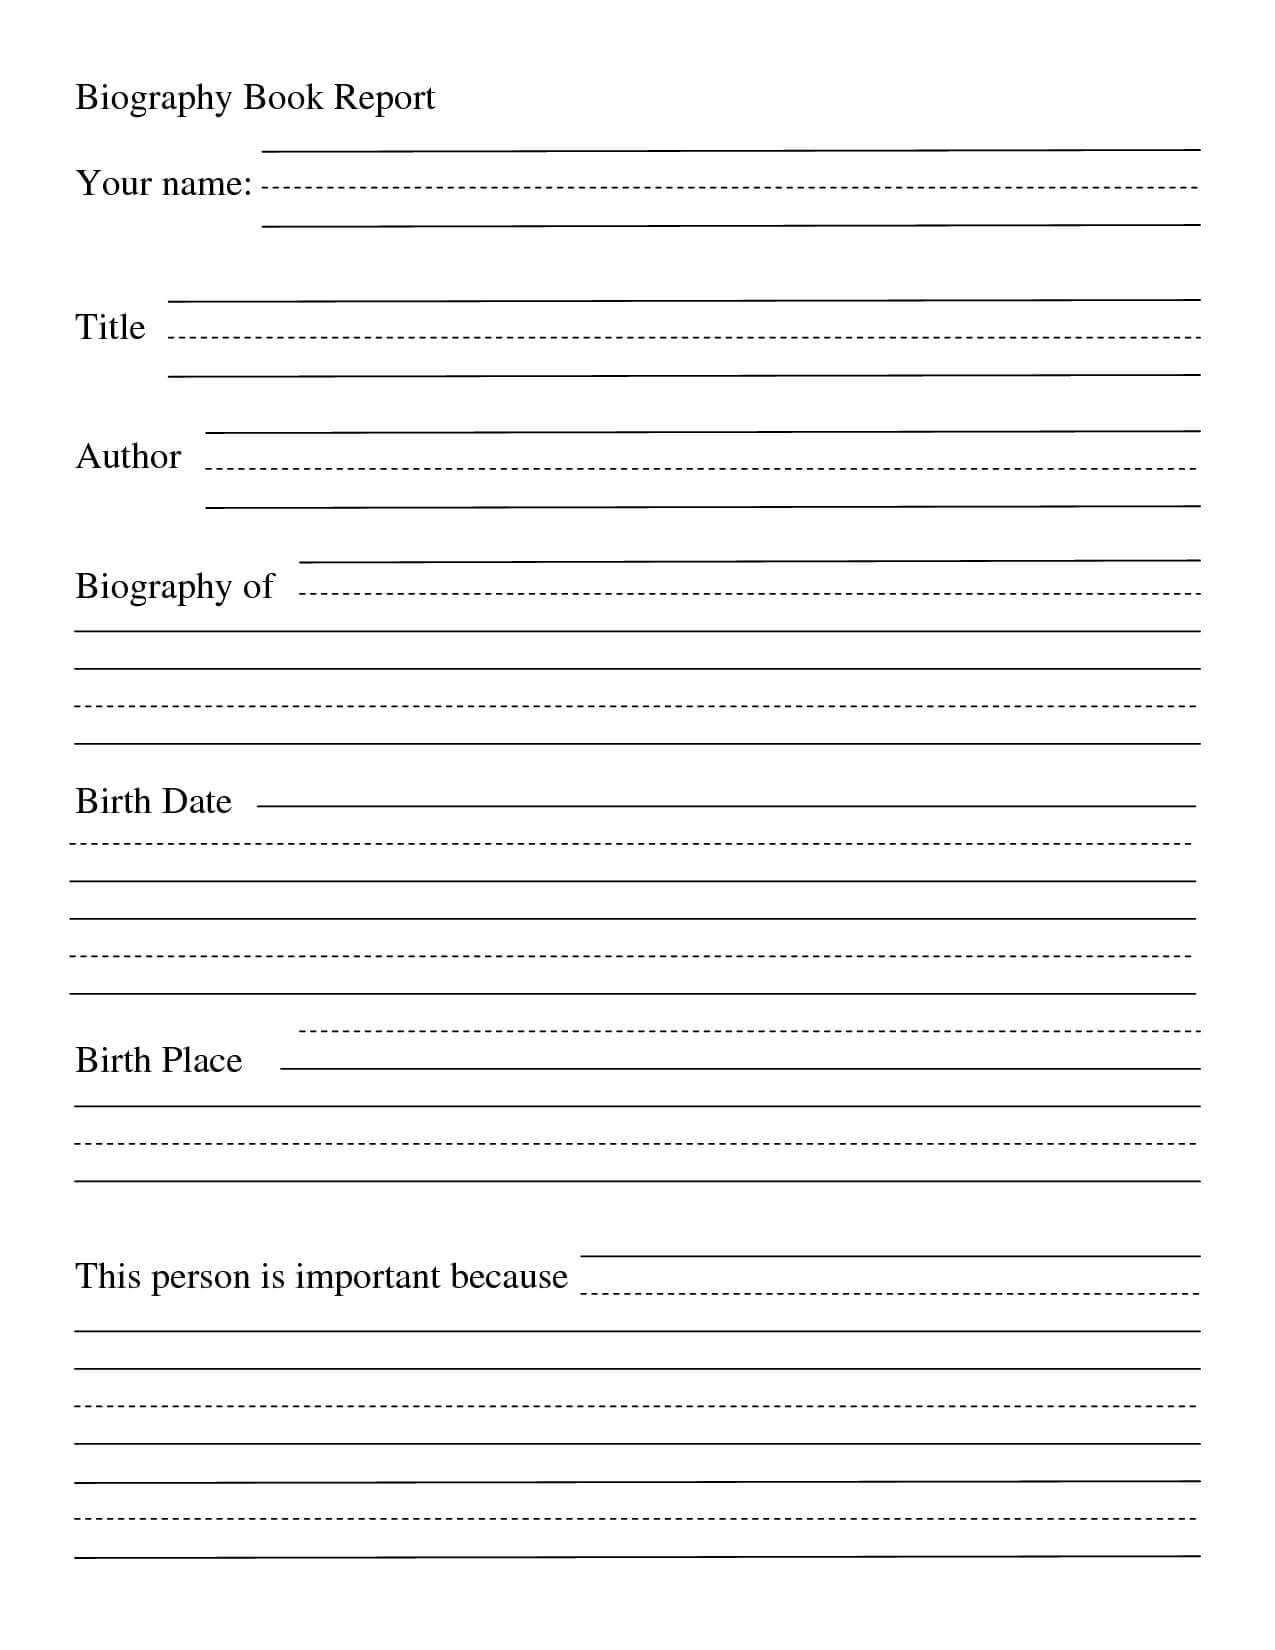 004 Biography Book Report Template Formidable Ideas Format Pertaining To High School Book Report Template